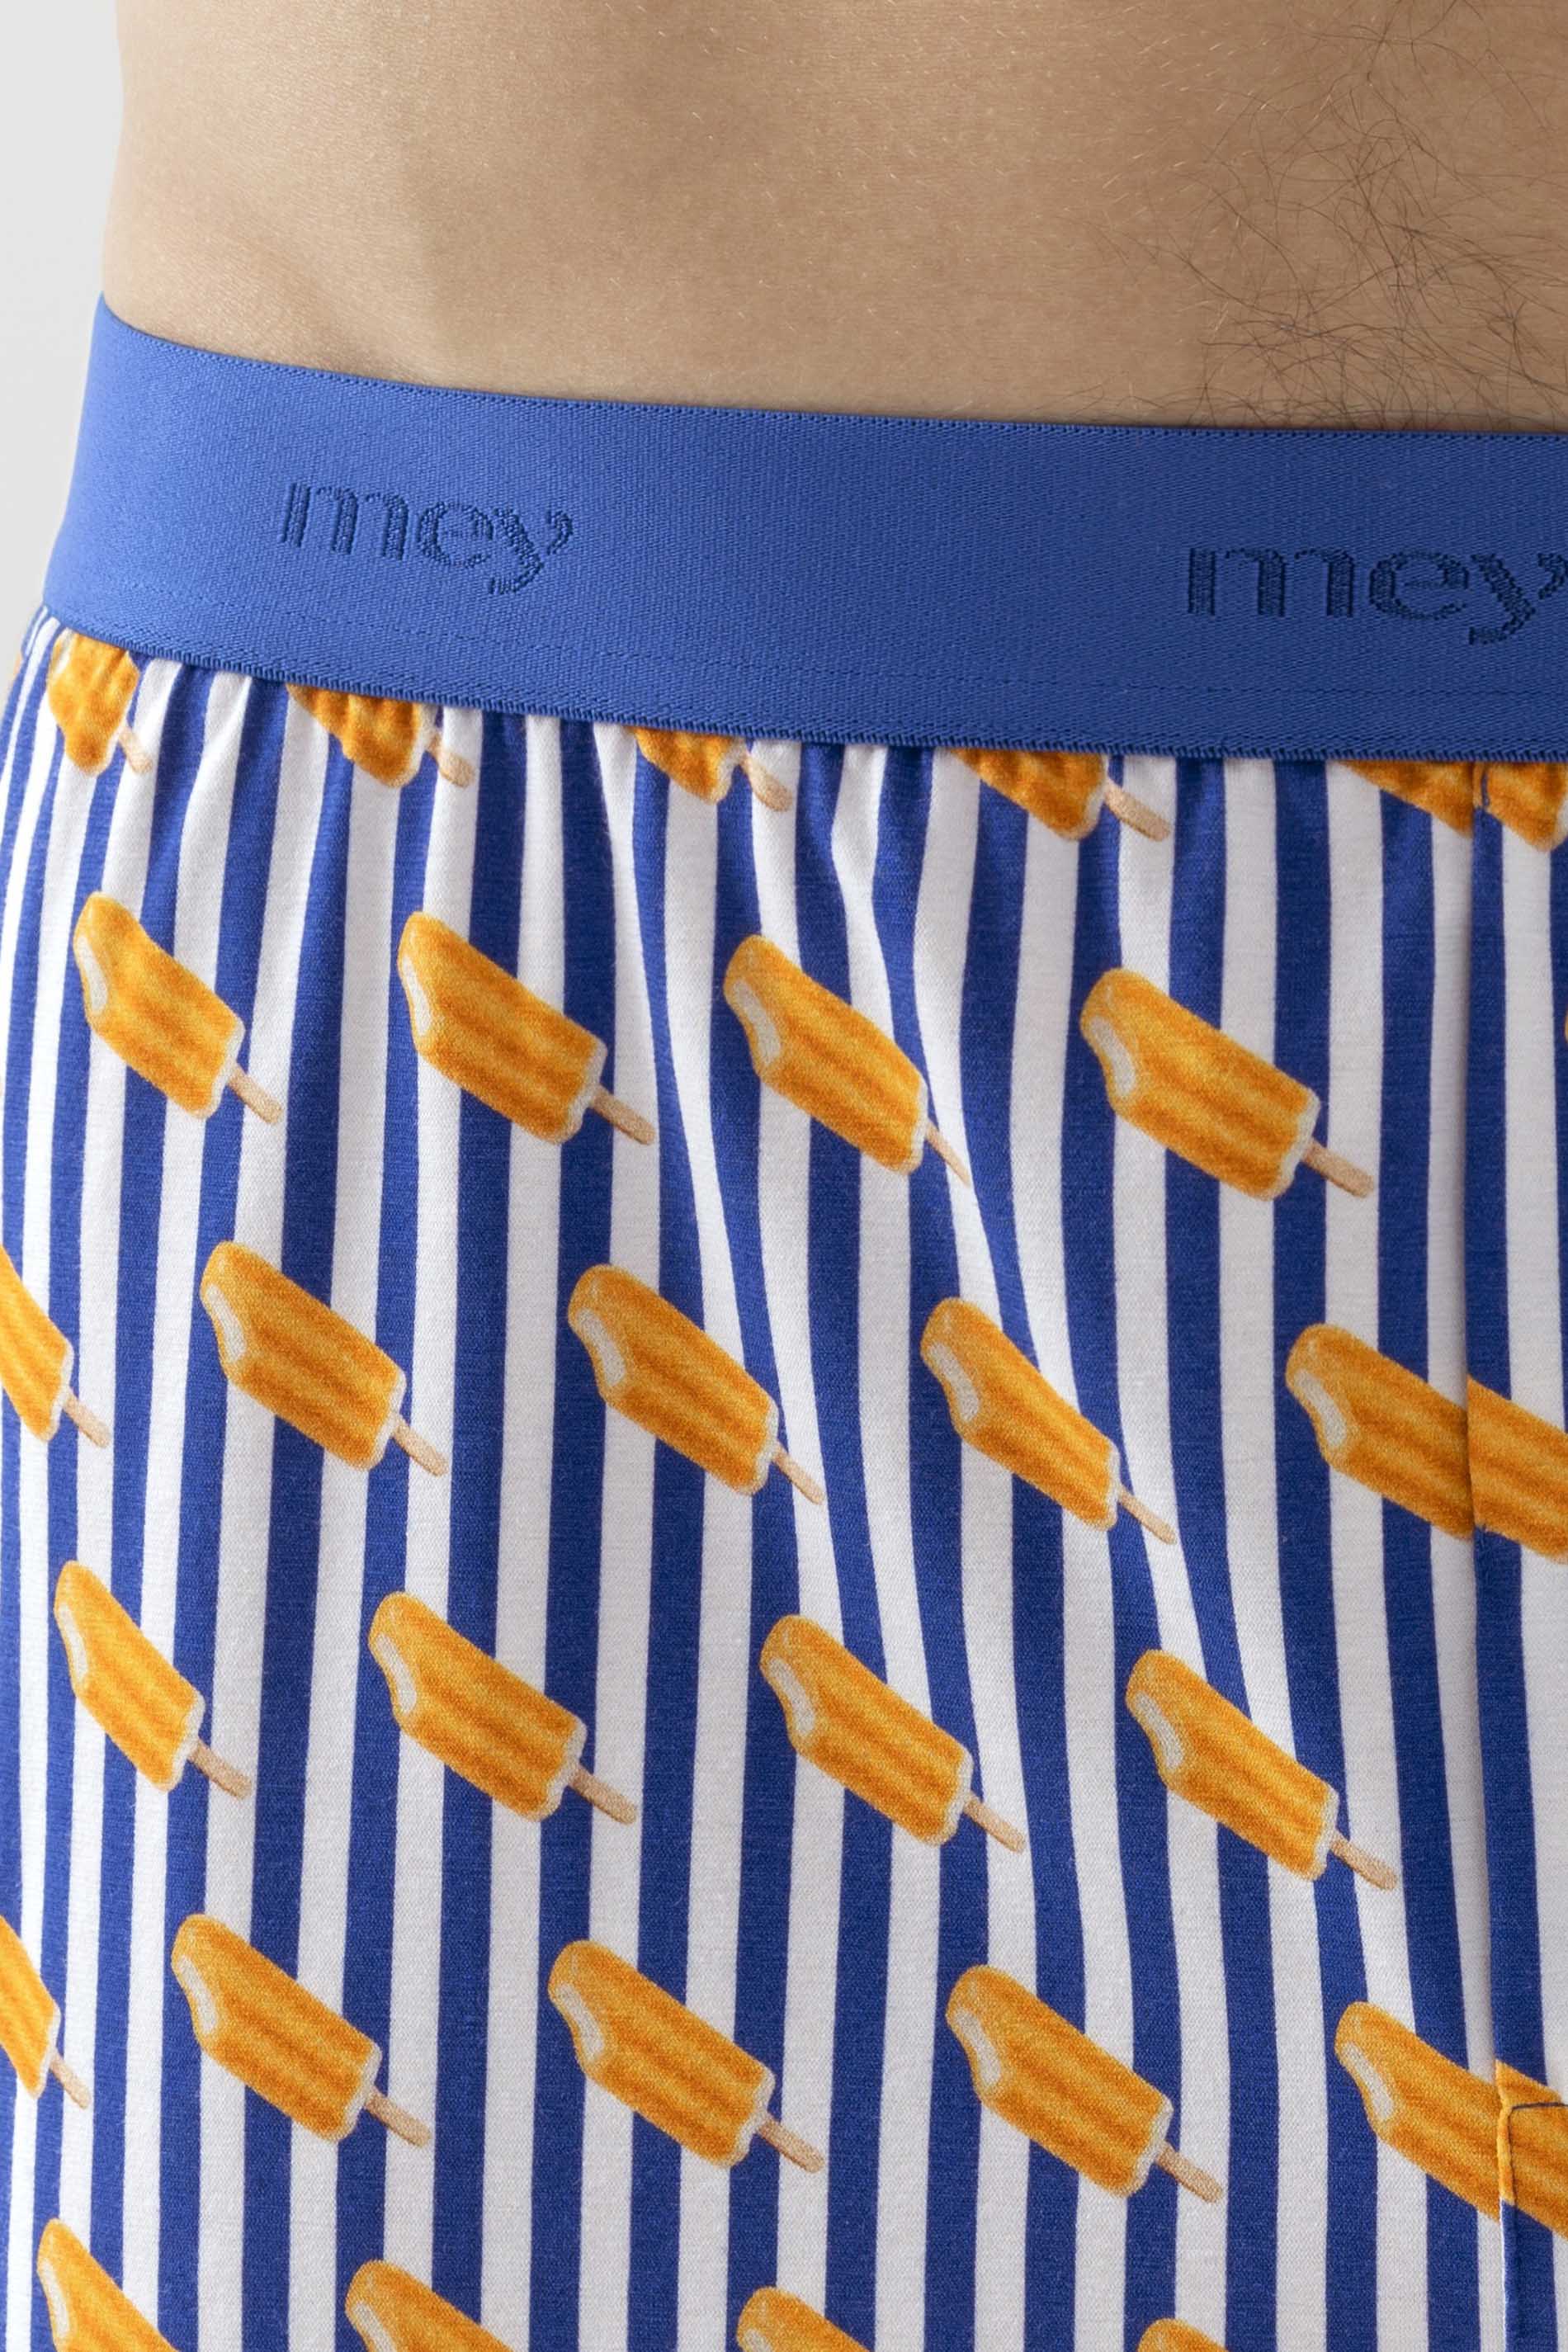 Boxer shorts Serie RE:THINK ICE Detailweergave 01 | mey®